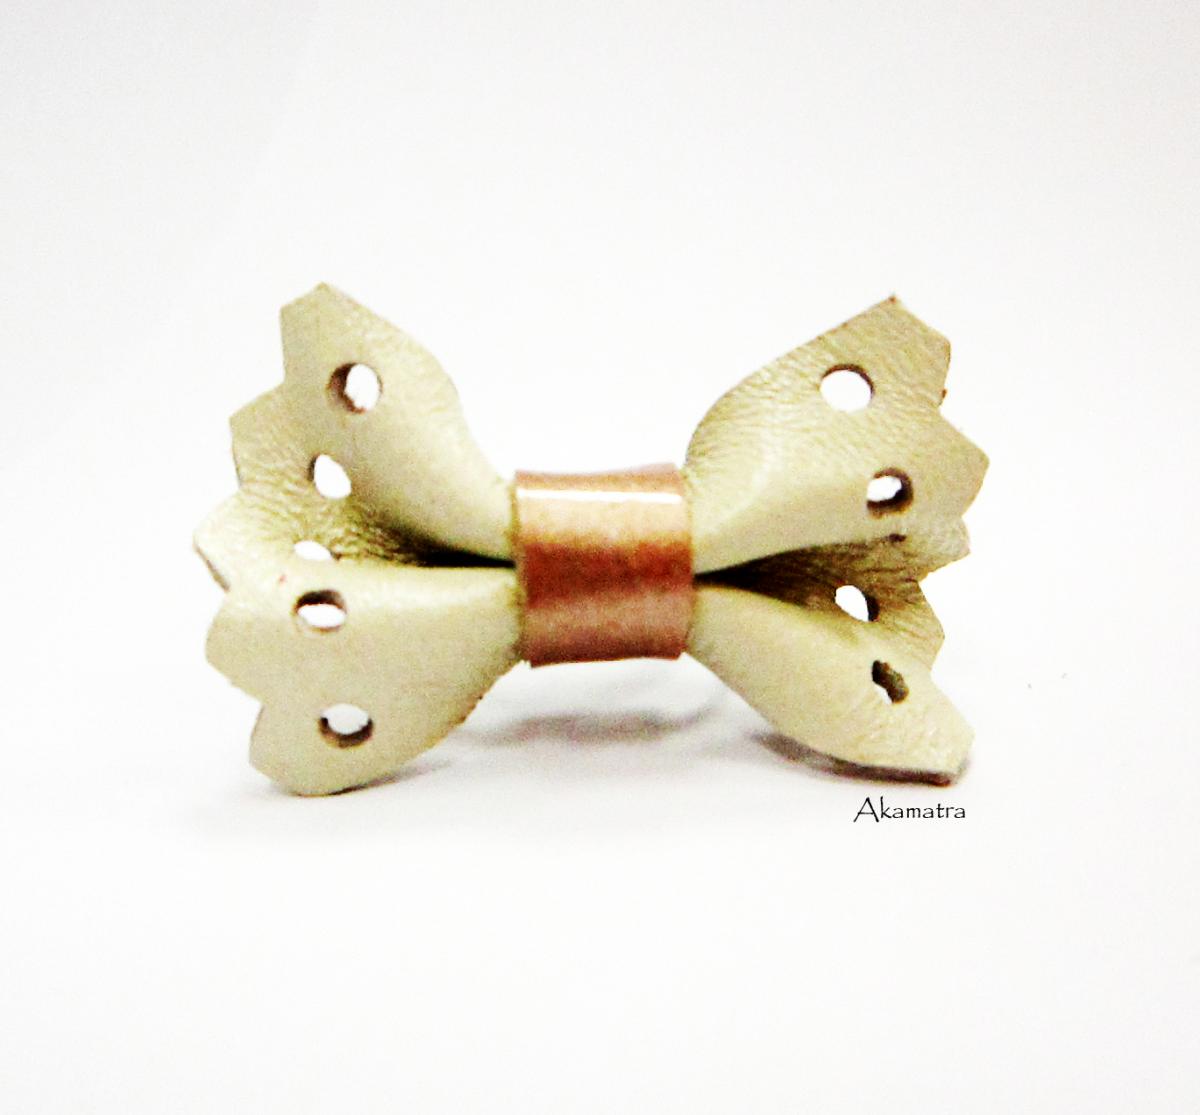 Leather Bow Ring, Bow Ring, Leather Ring, Cute Ring, Bridal Ring, Bridesmaides Ring, Off- White And Champagne Color Leather Ring, Under 10